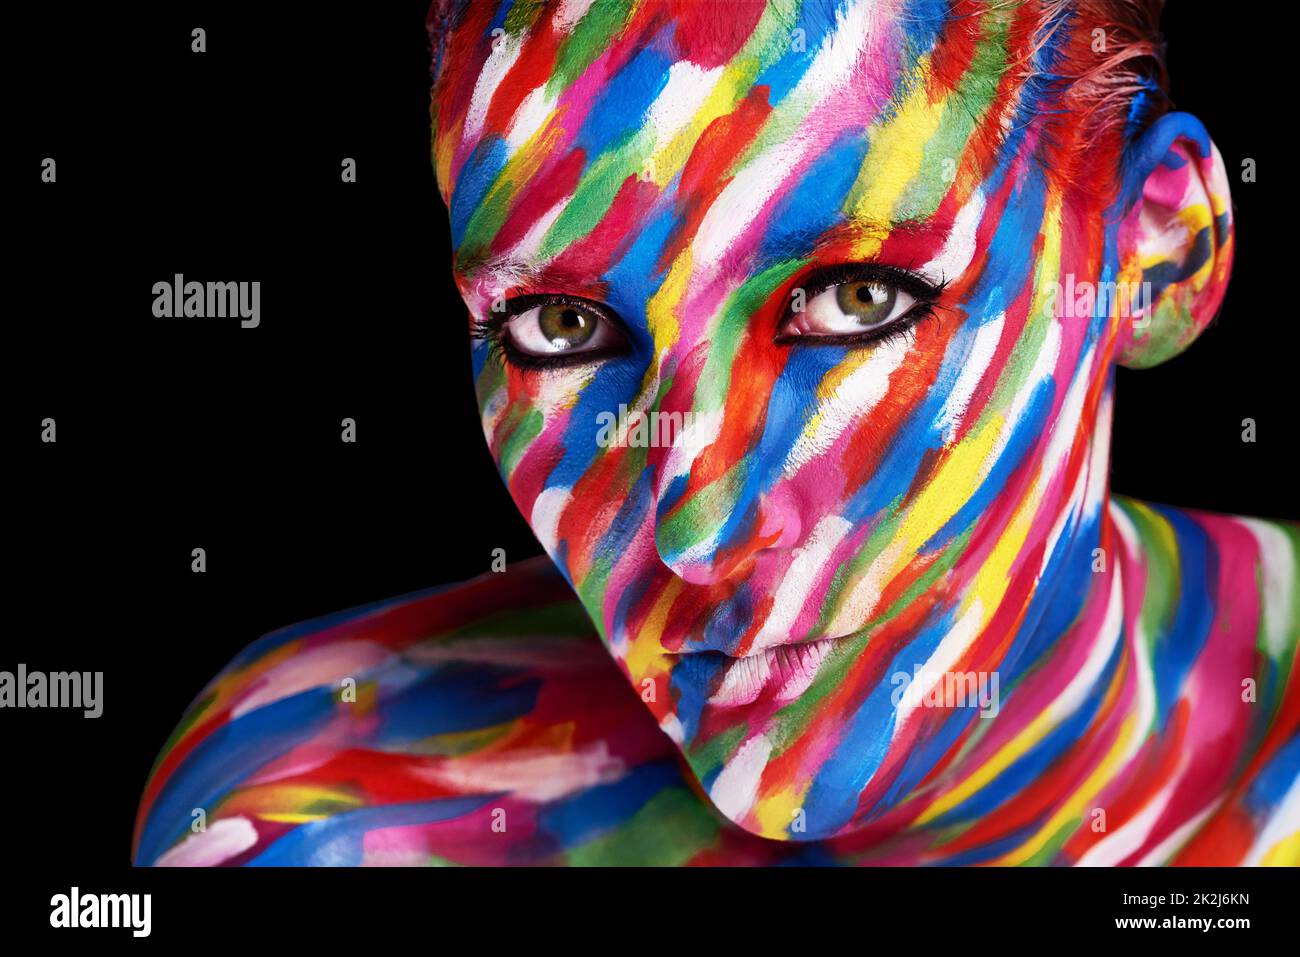 Live life vividly. Studio shot of a young woman posing with brightly colored paint on her face against a black background. Stock Photo